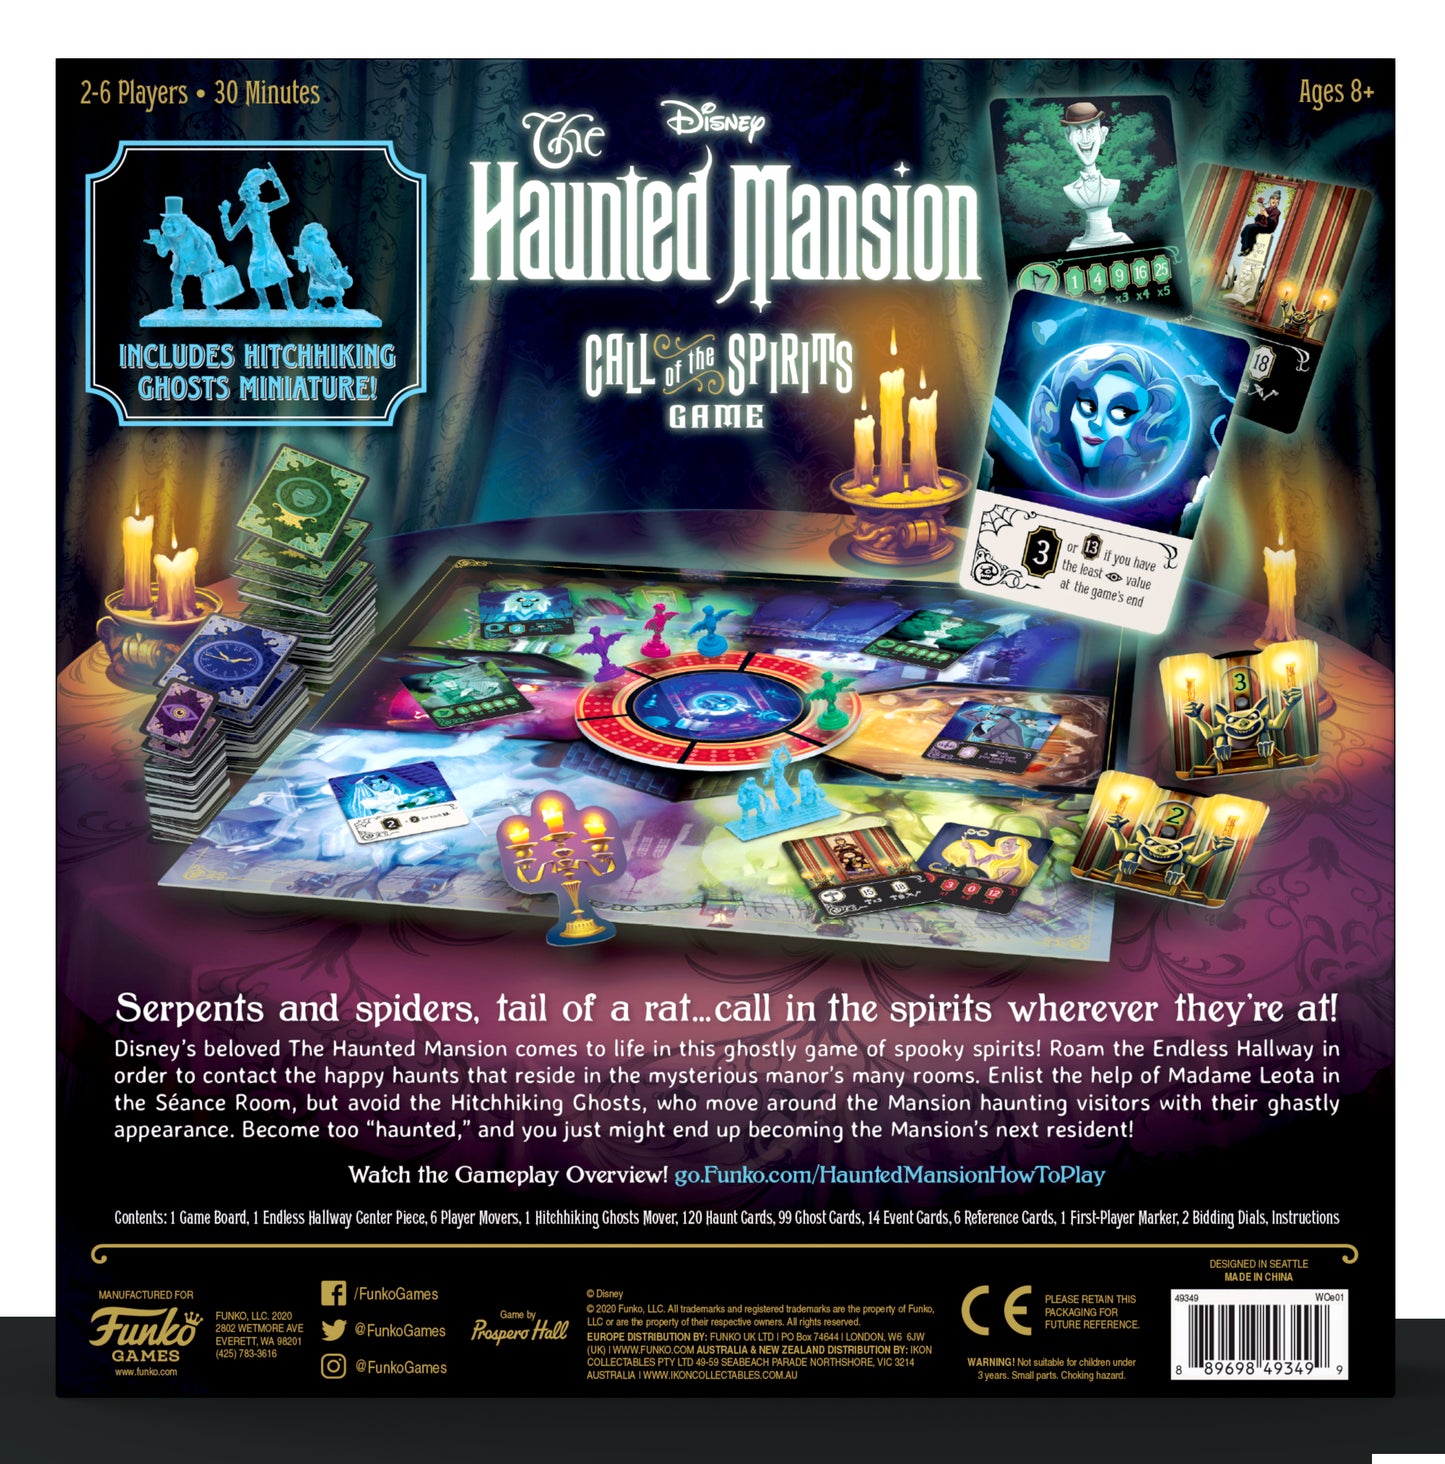 Disney’s The Haunted Mansion Call of the Spirits Game